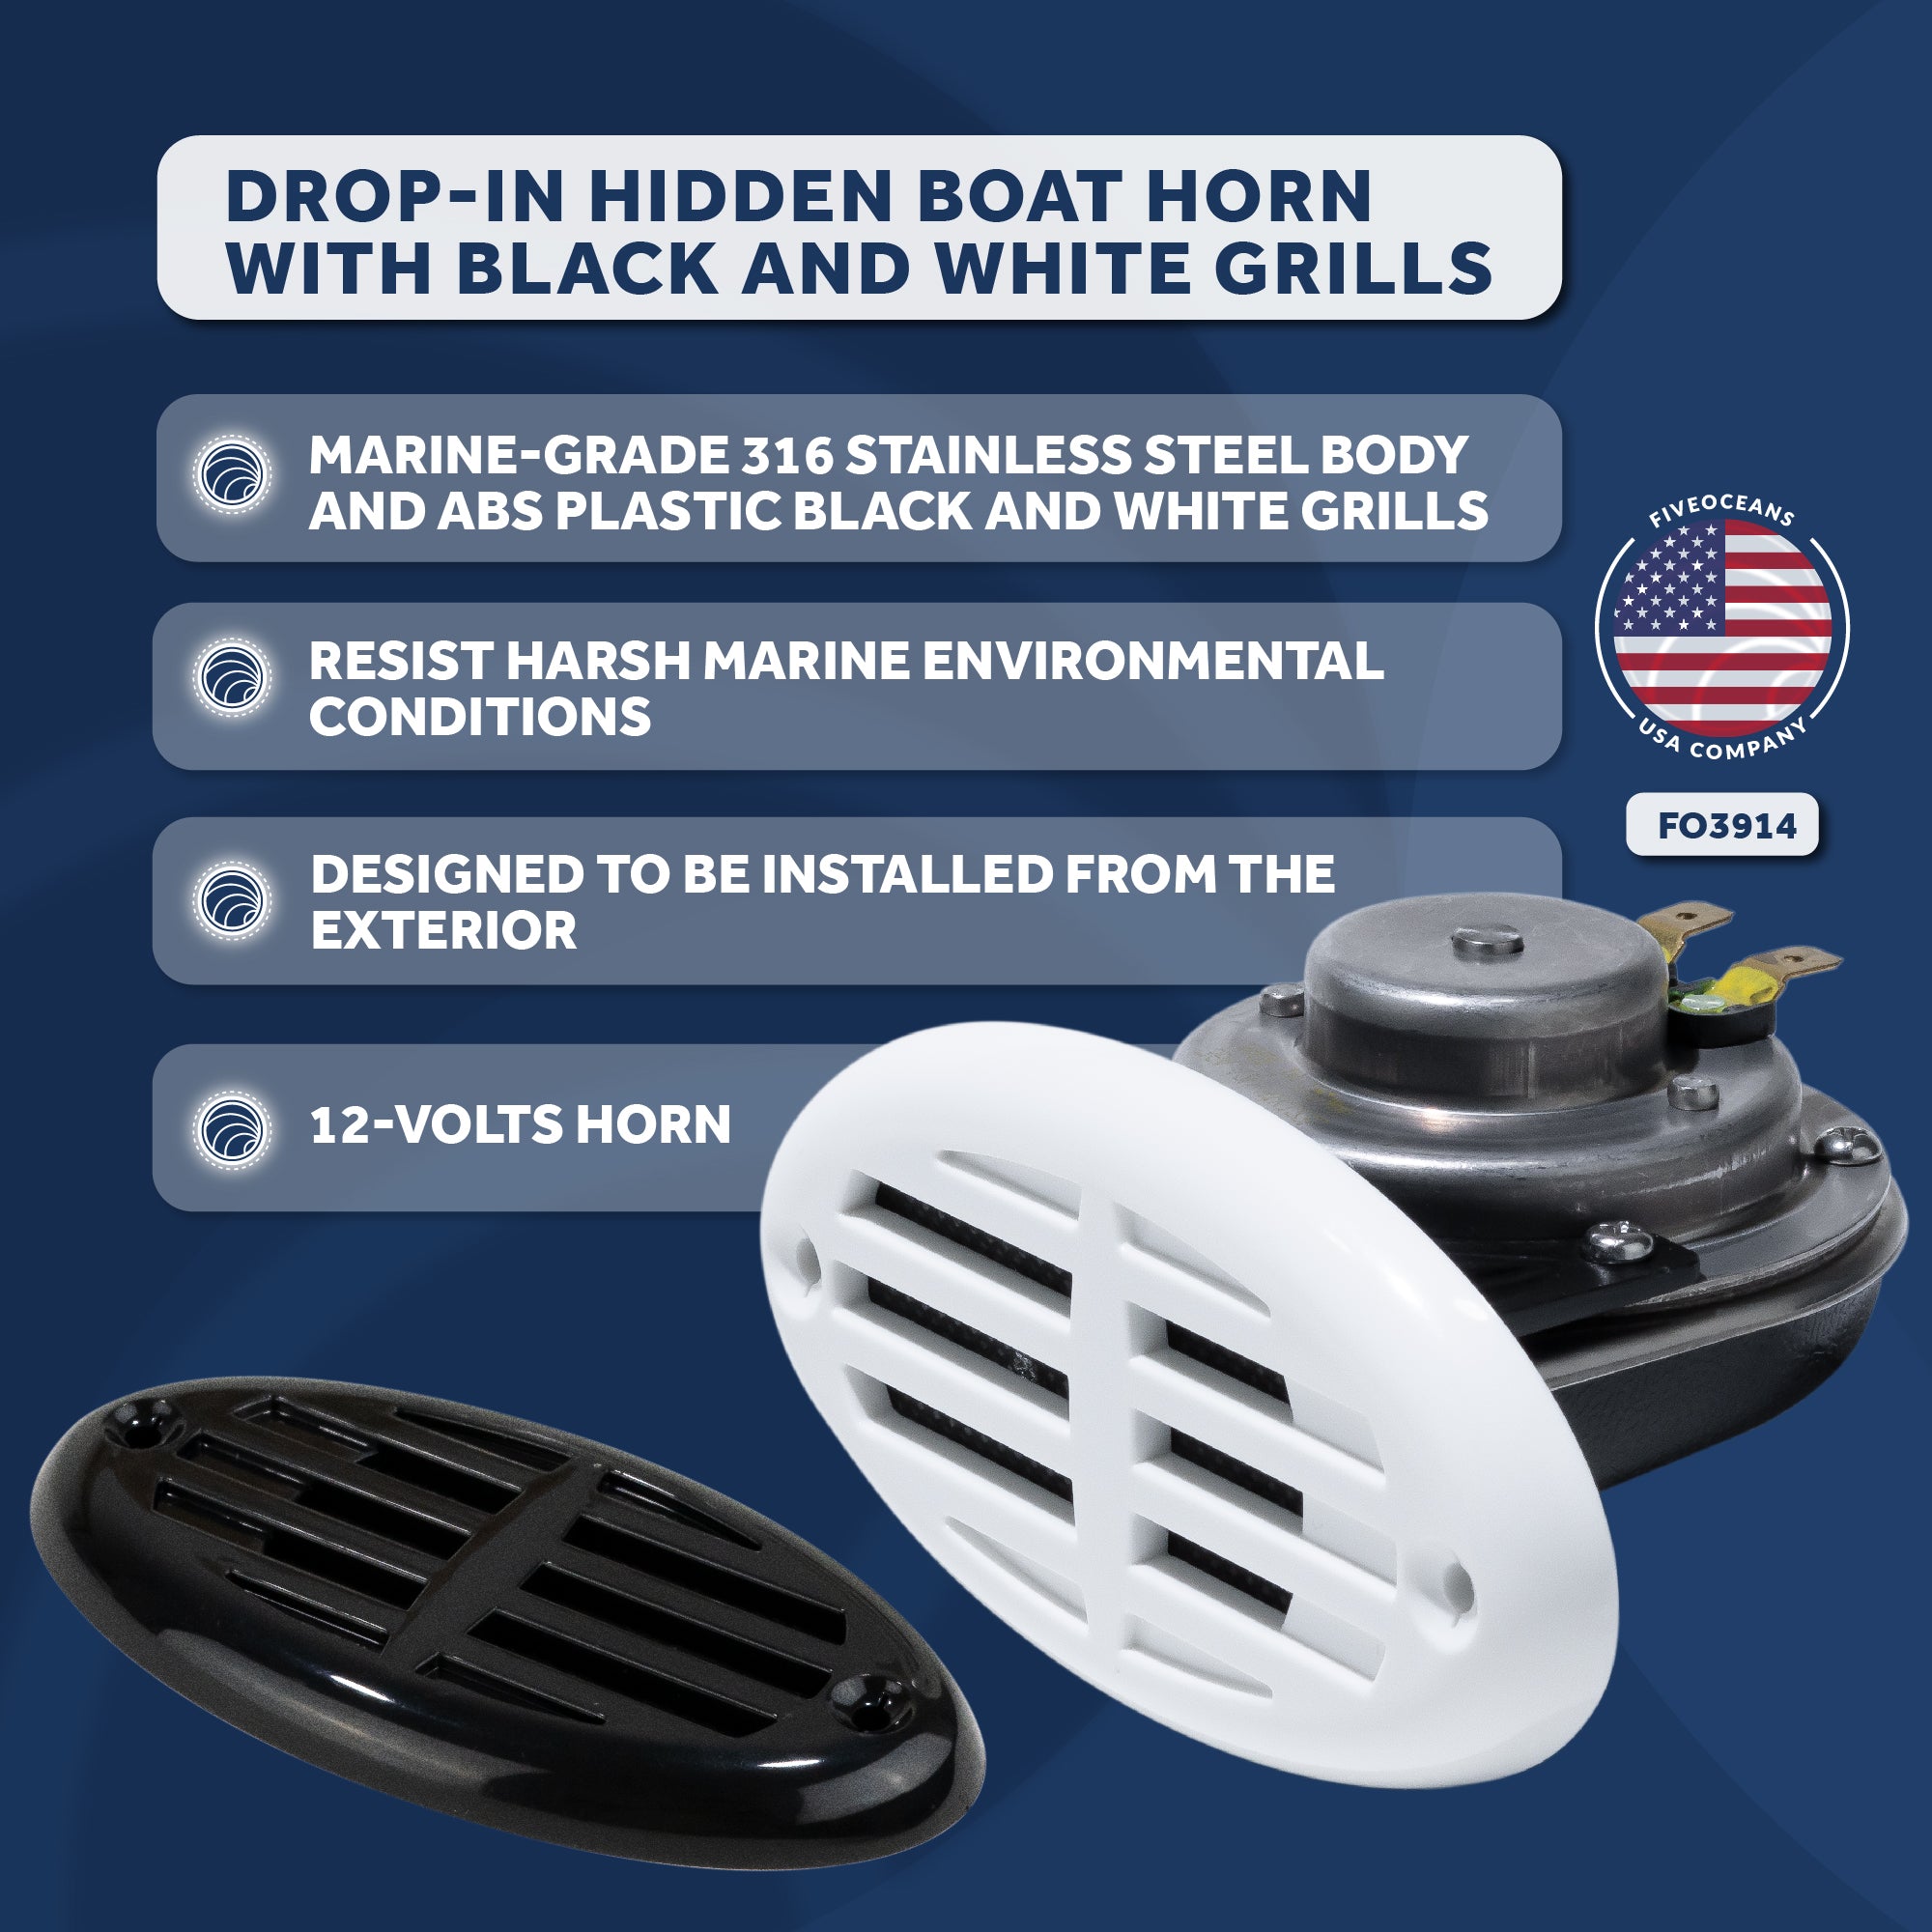 Drop-in Hidden Boat Horn with Black and White Grills, 12V - 110+5 dB - FO3914